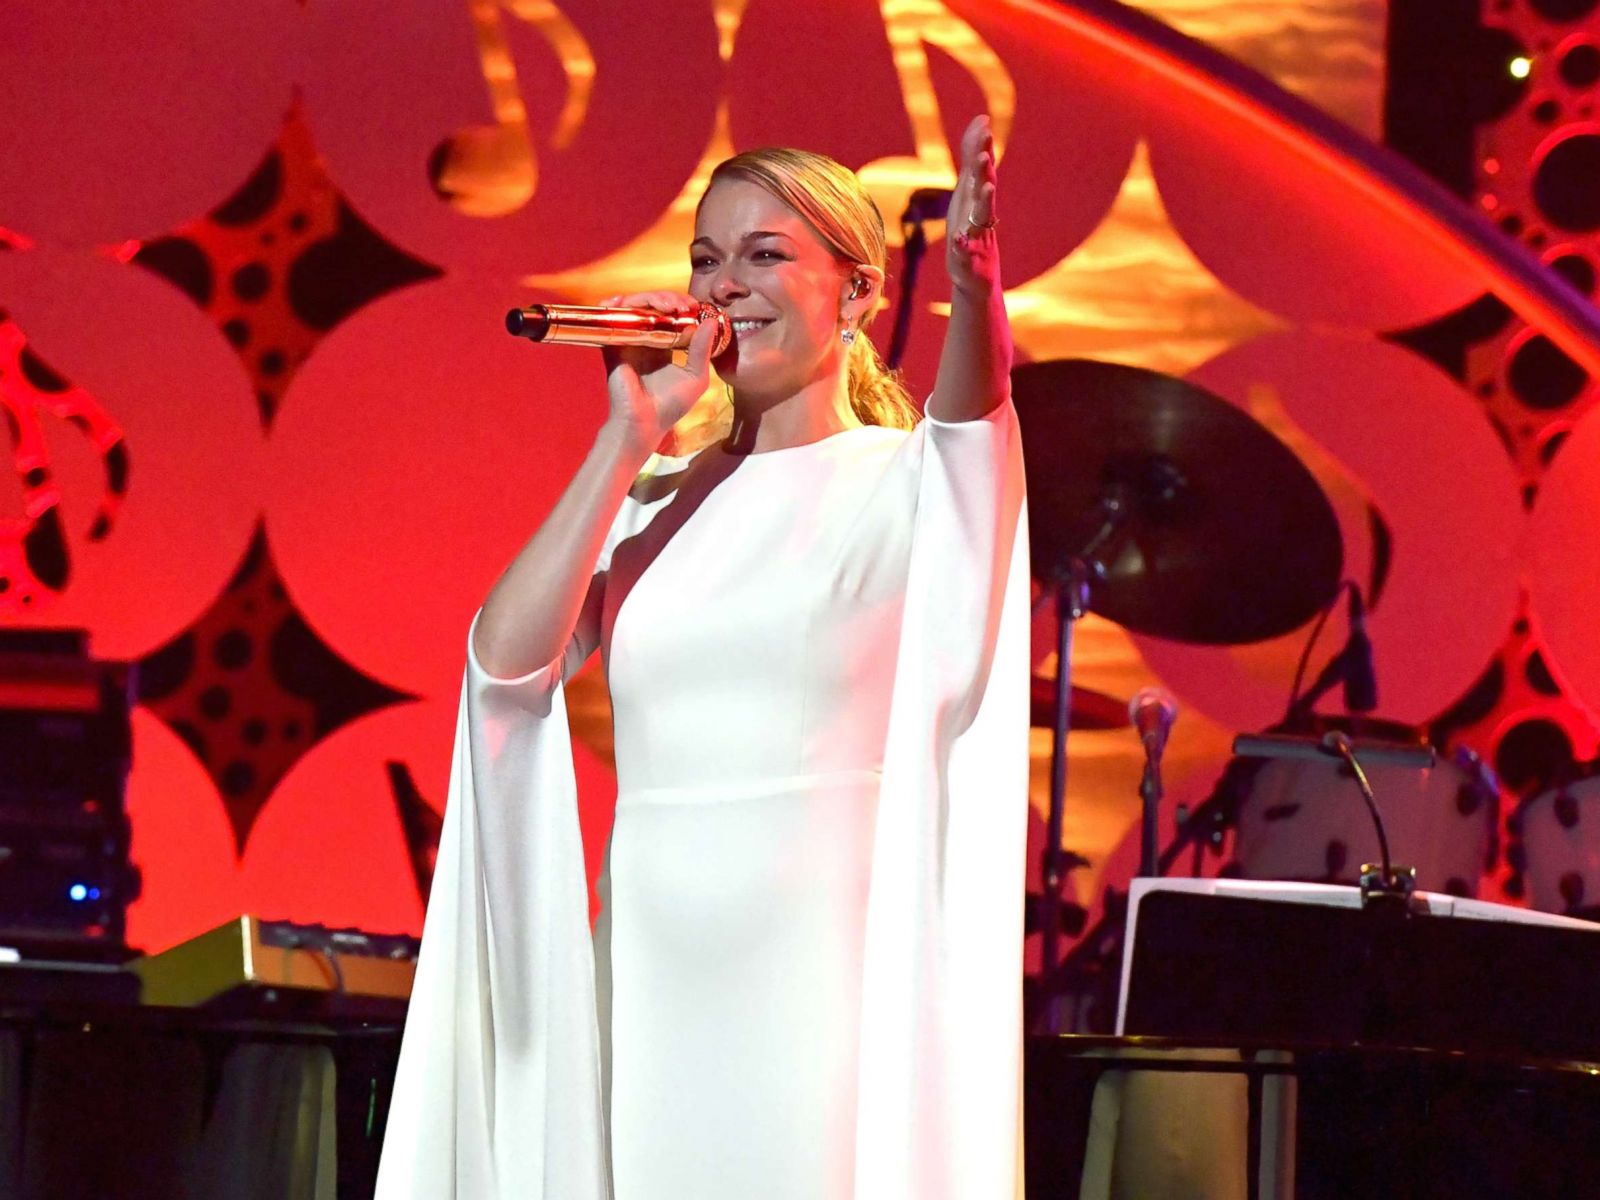 LeAnn Rimes opens up about how meditation changed her 'whole outlook on life'